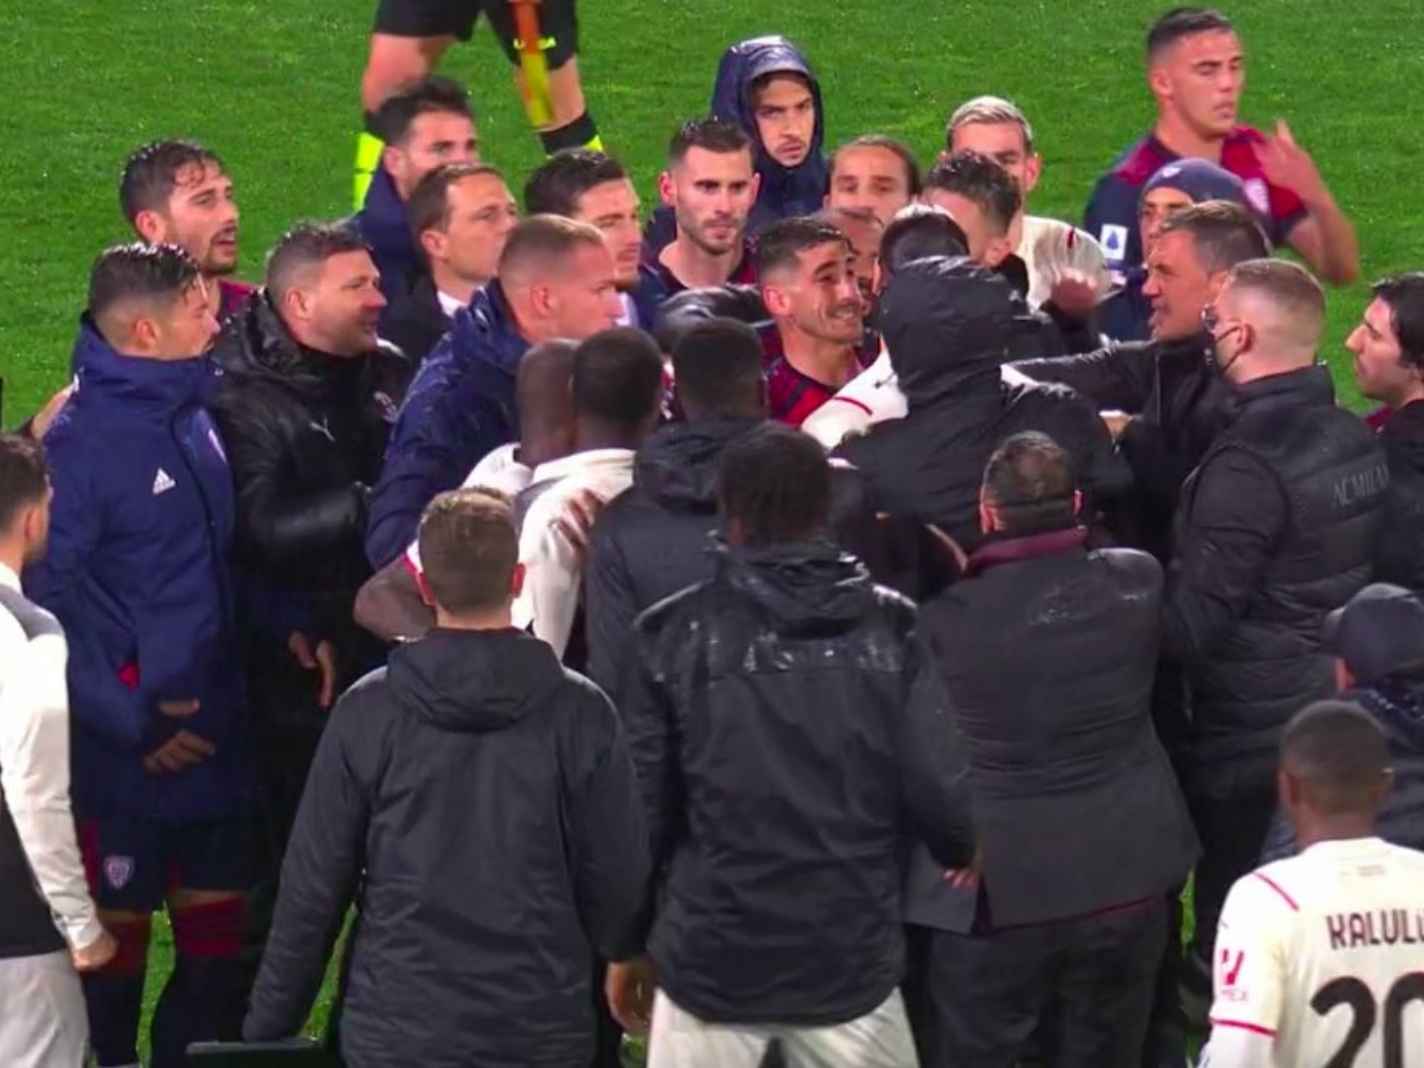 The all-out brawl after Tomori and Maignan are racially abused by Cagliari fans